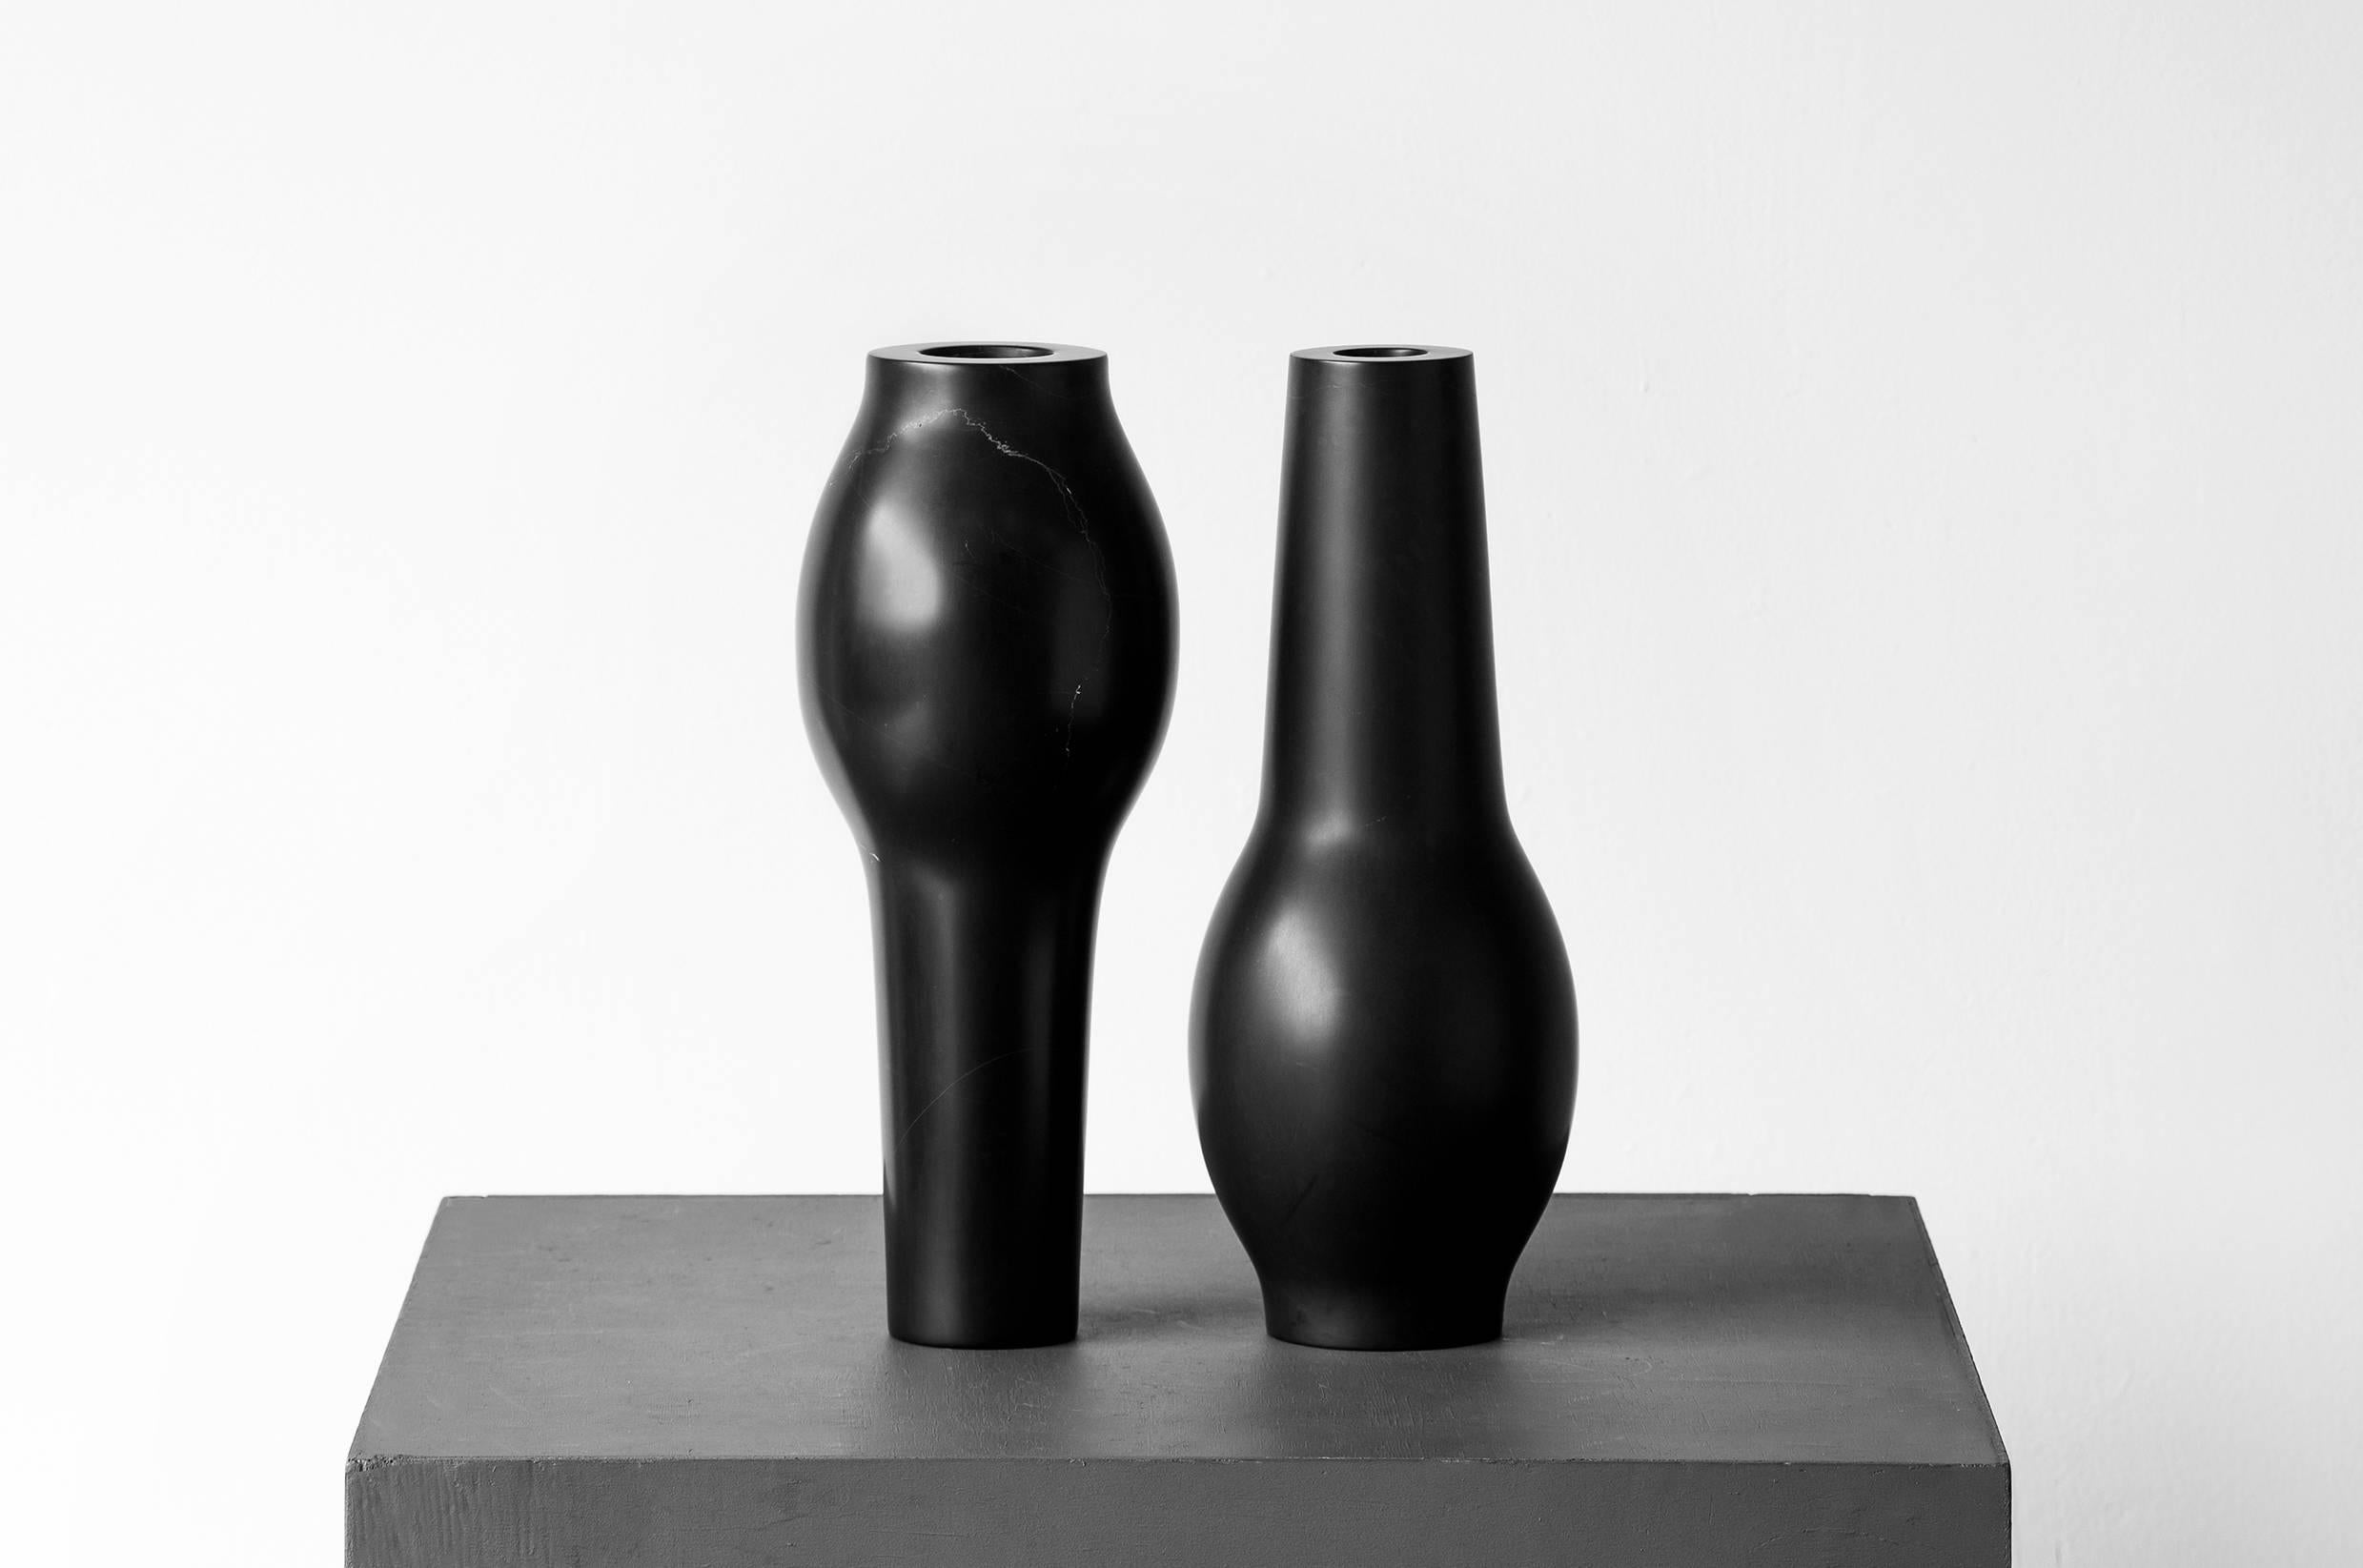 The Black Marble Vessel from the Sacred Ritual Objects collection by EWE Studio. Created out of fascination by the evolving skills of the artisans and their successful execution of exquisite objects, designed to ignite a connection with the